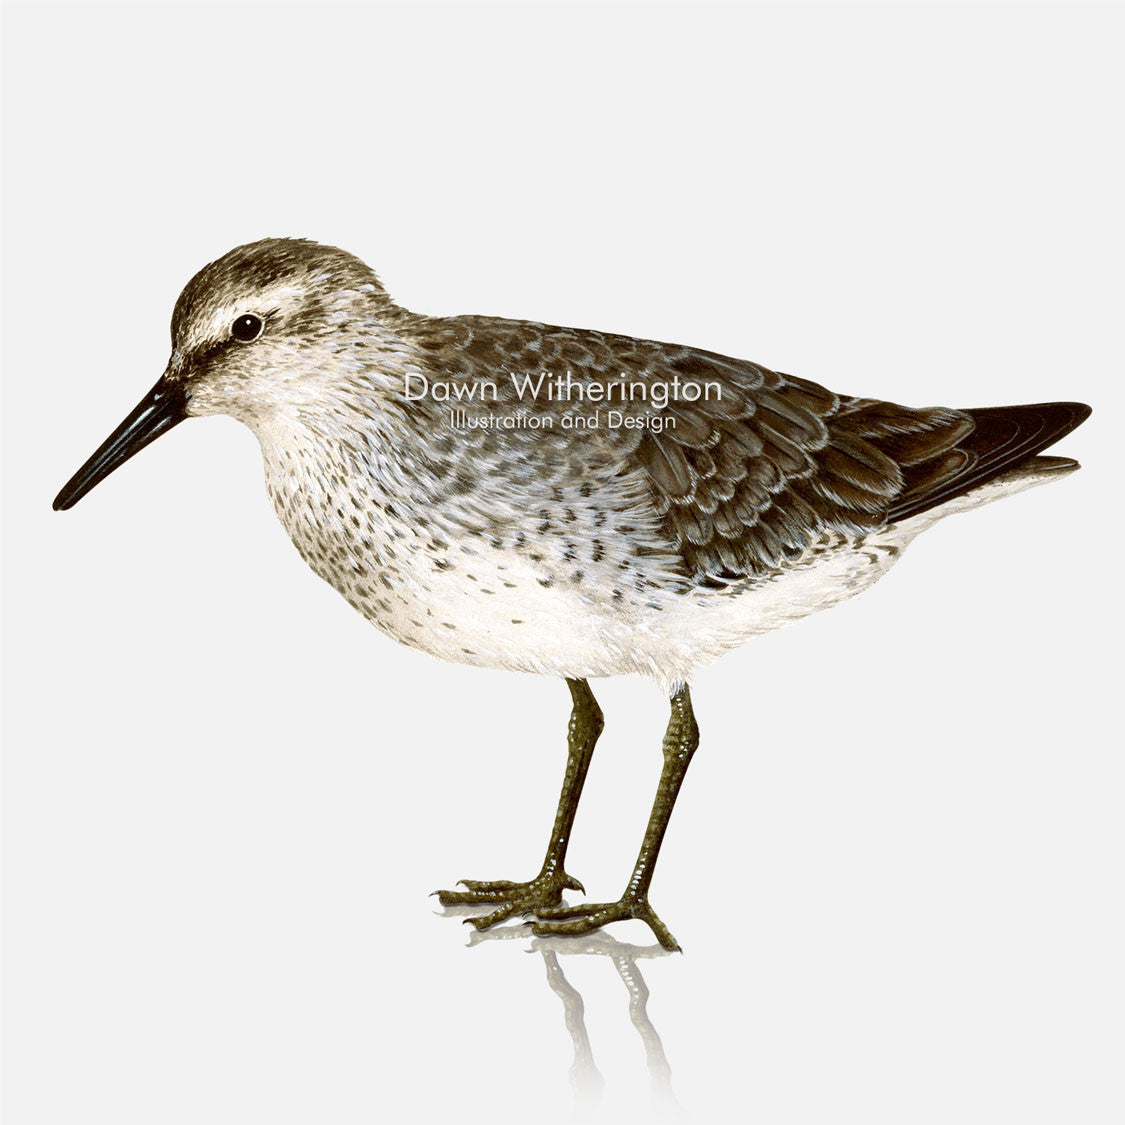 This beautiful illustration of a Red knot, Calidris canutus, in winter plumage, is biologically accurate in detail.